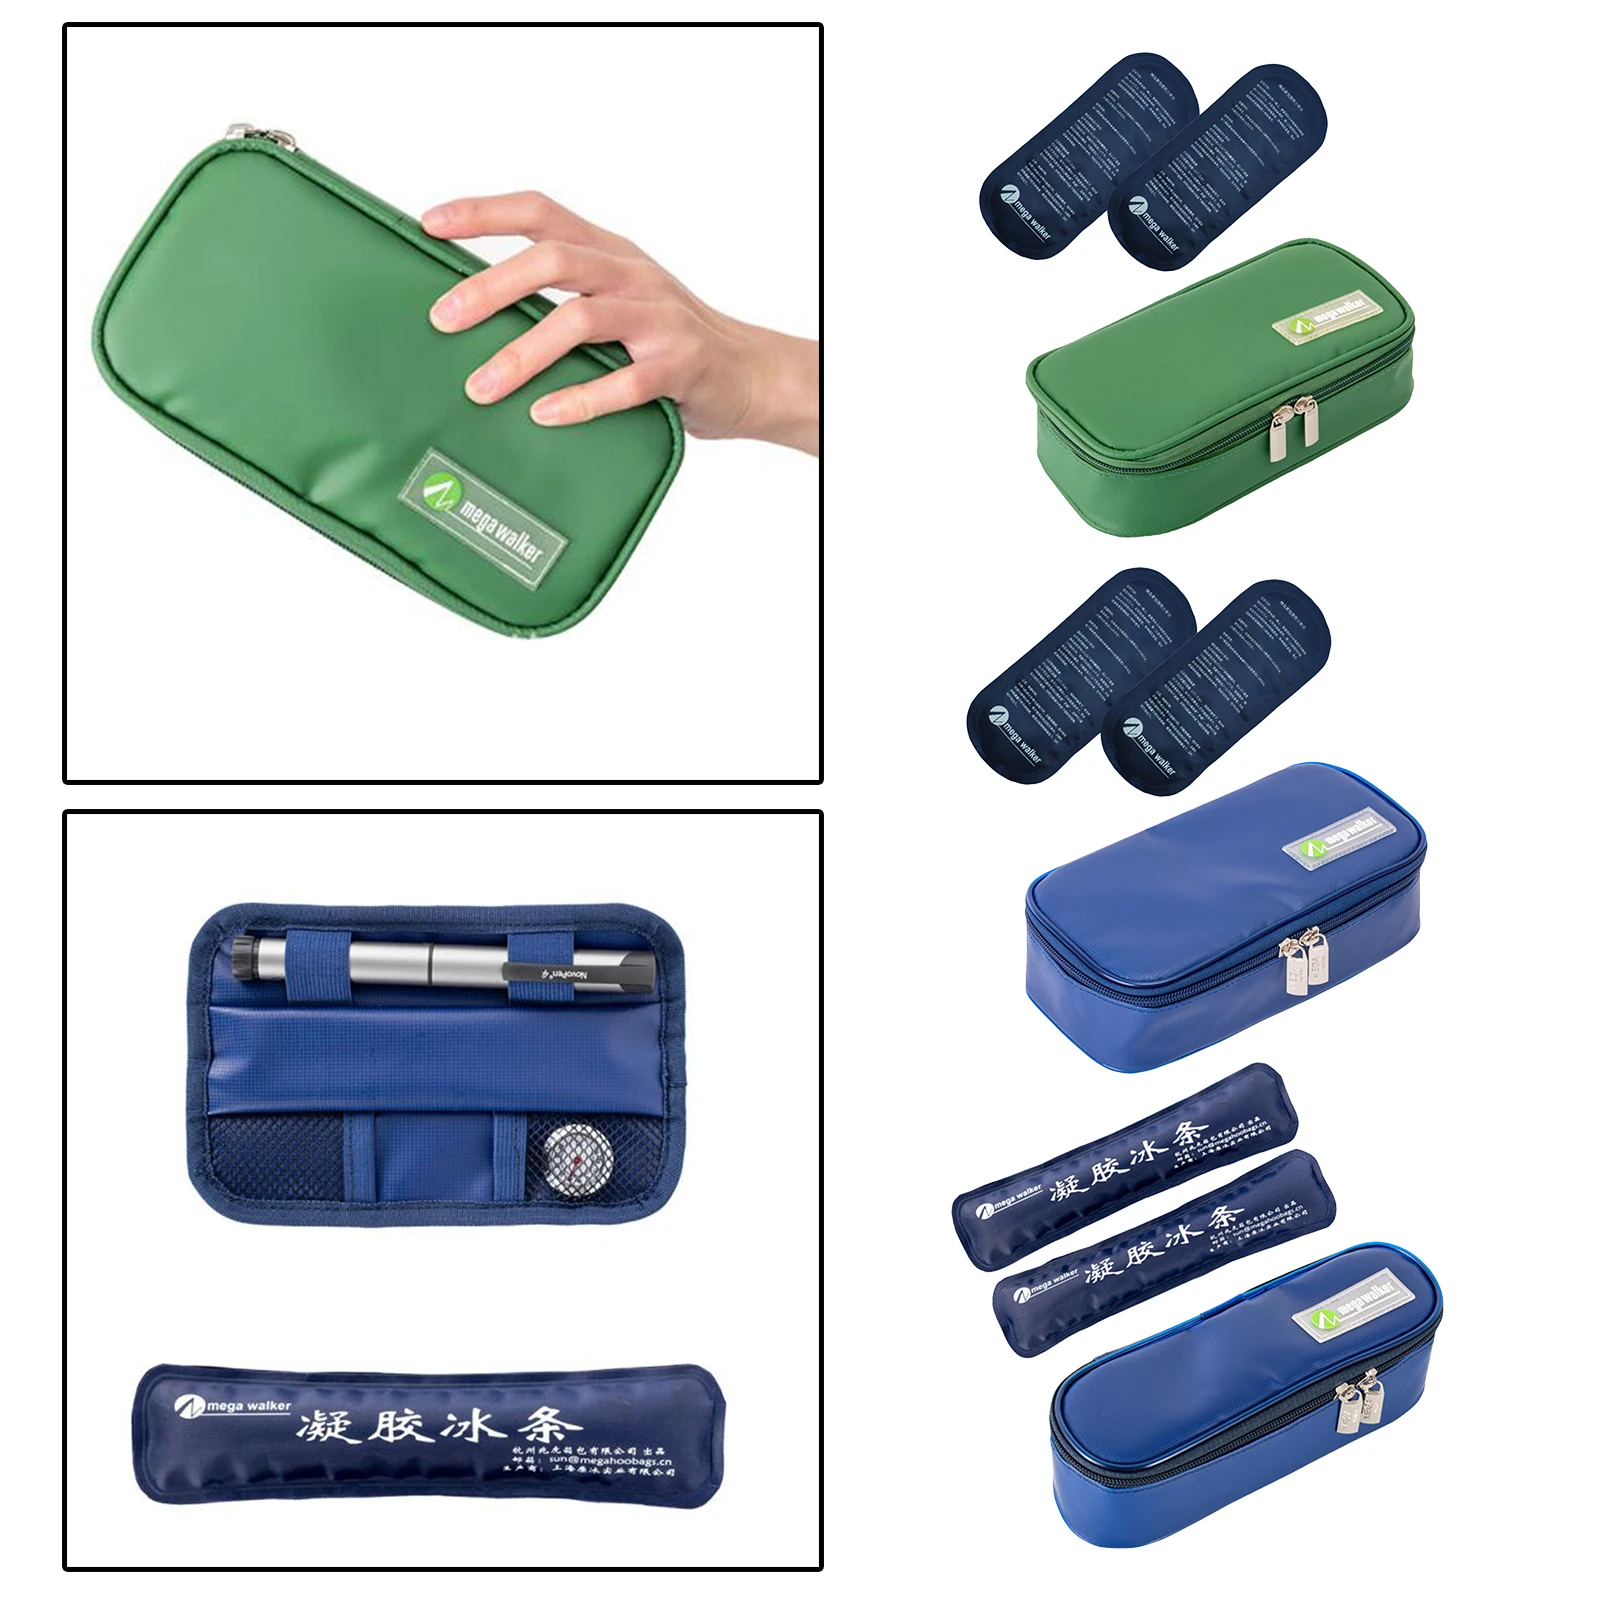 Insulin Cooler Bag Portable Insulated Diabetic Insulin Travel Case Cooler Box Aluminum Foil ice Bag with 2 Gel Ice Packs